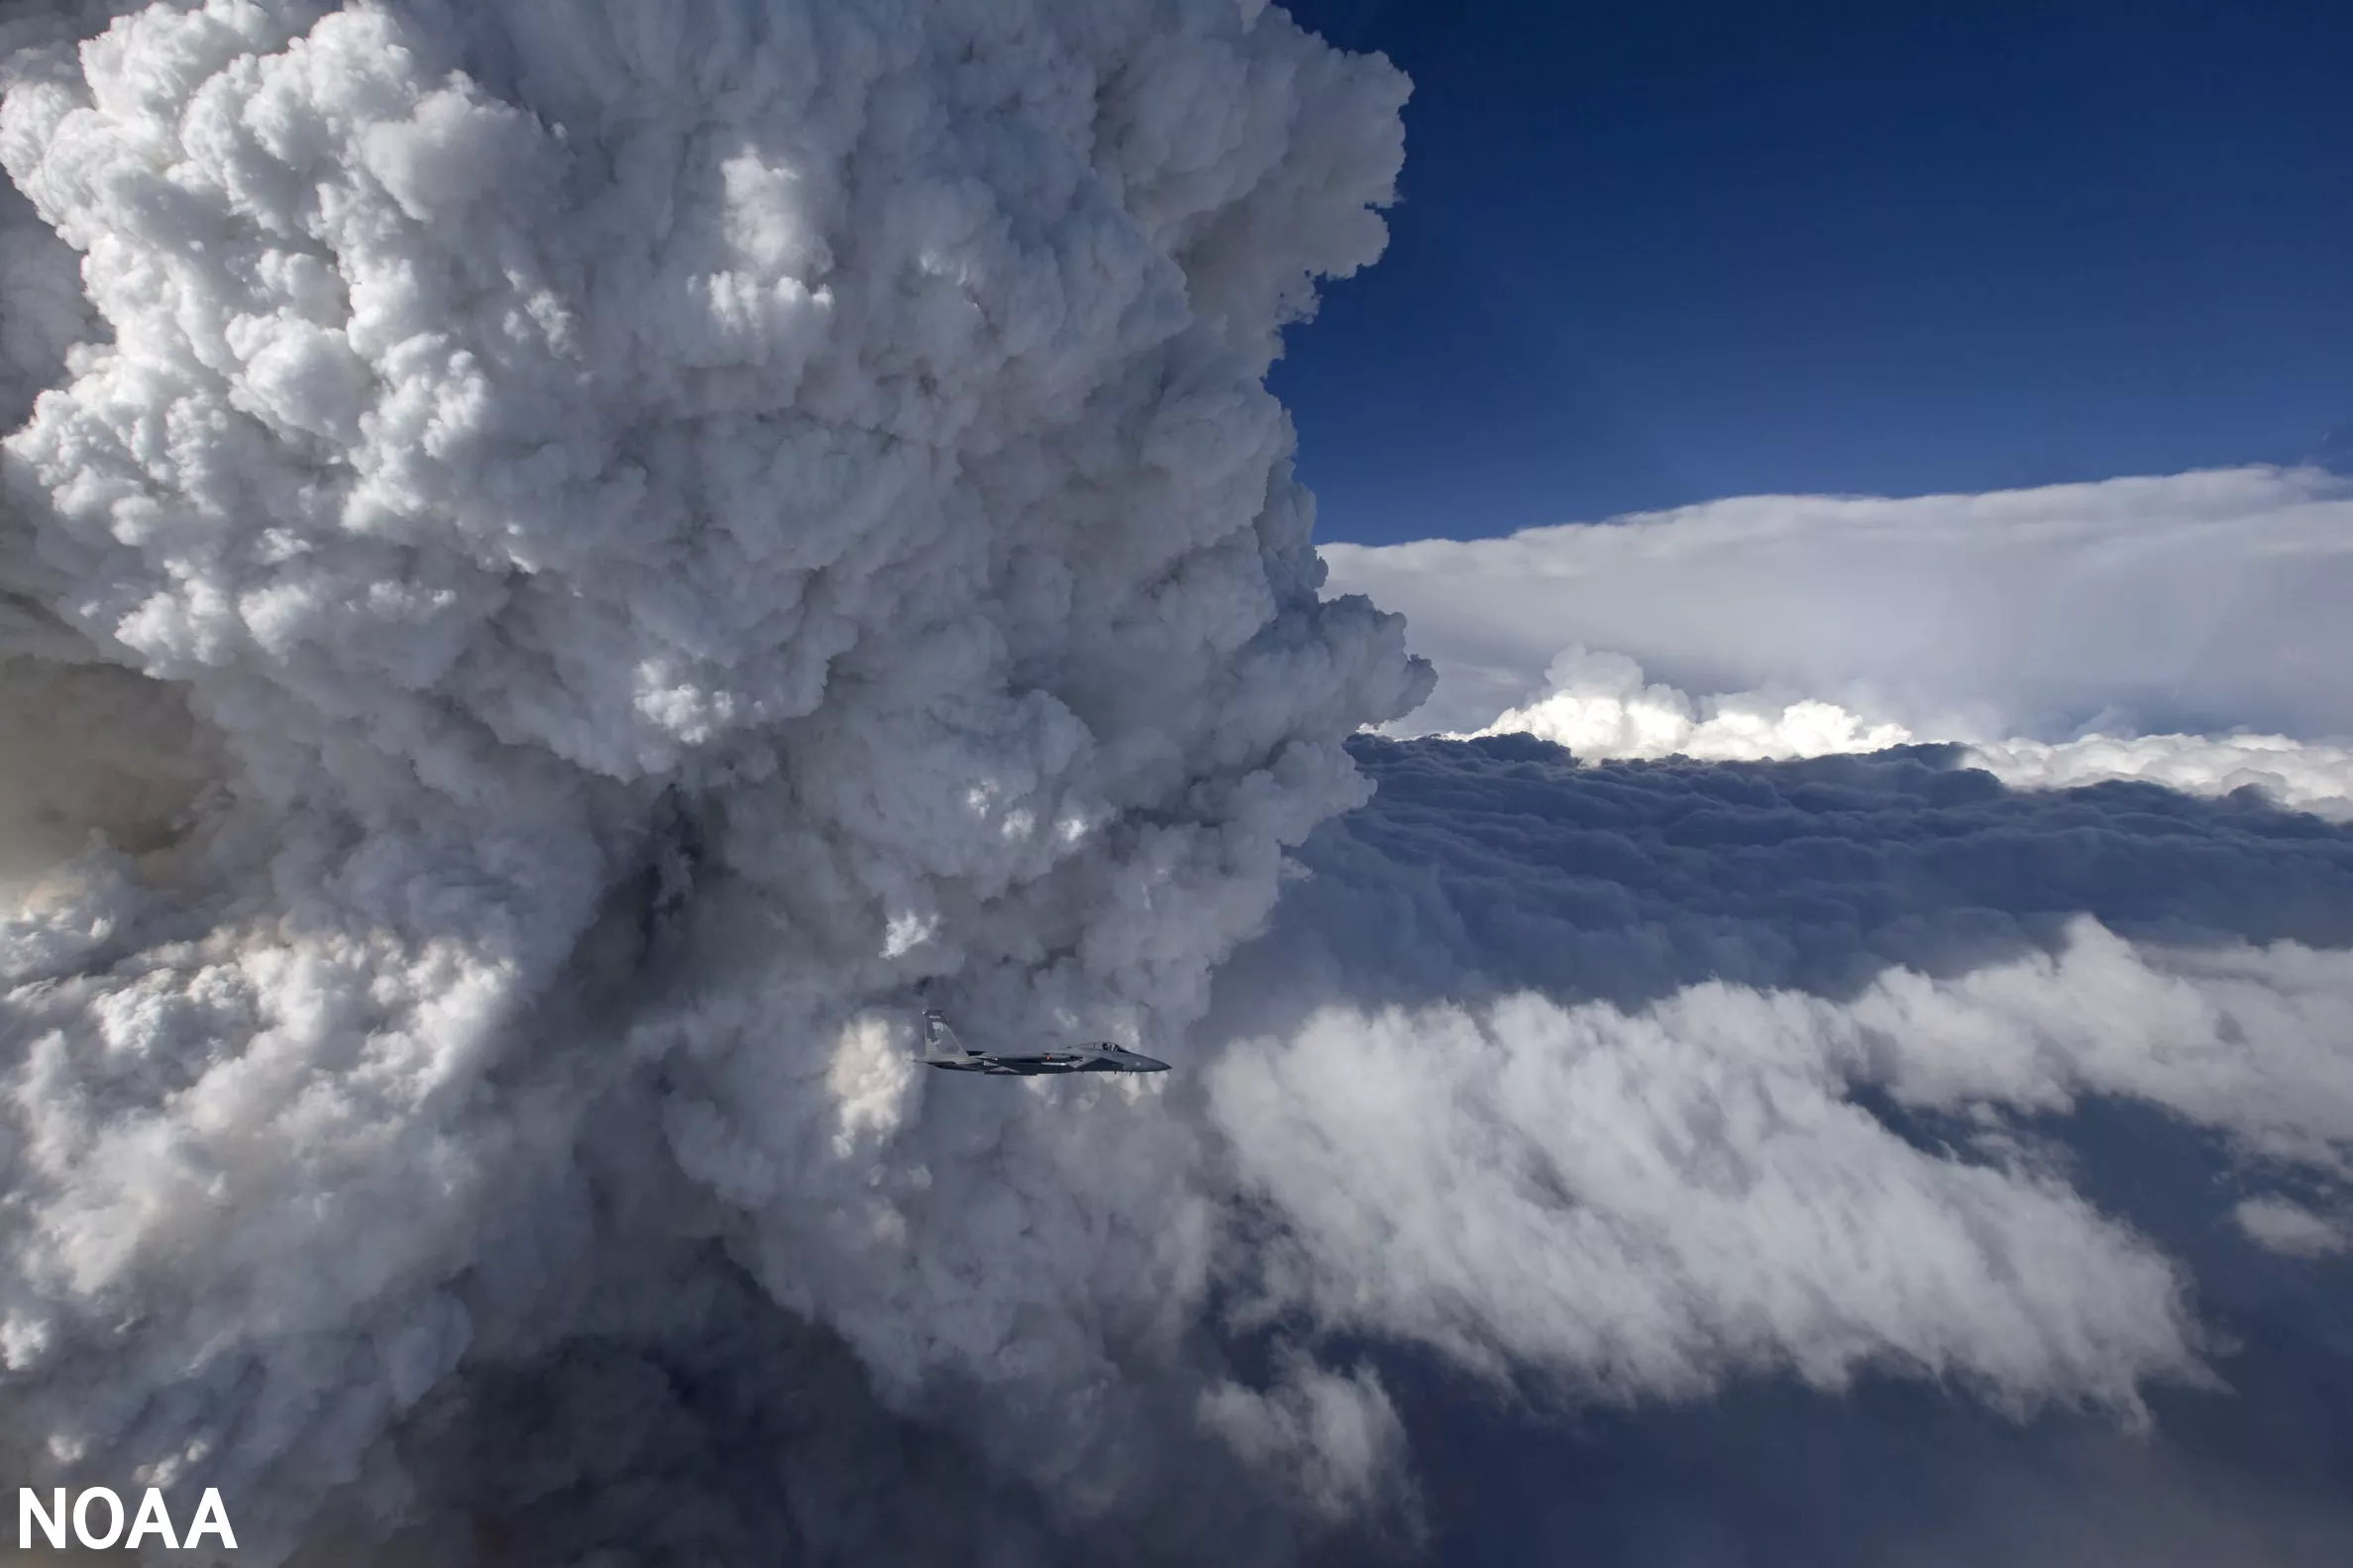 Image of a volcano exploding